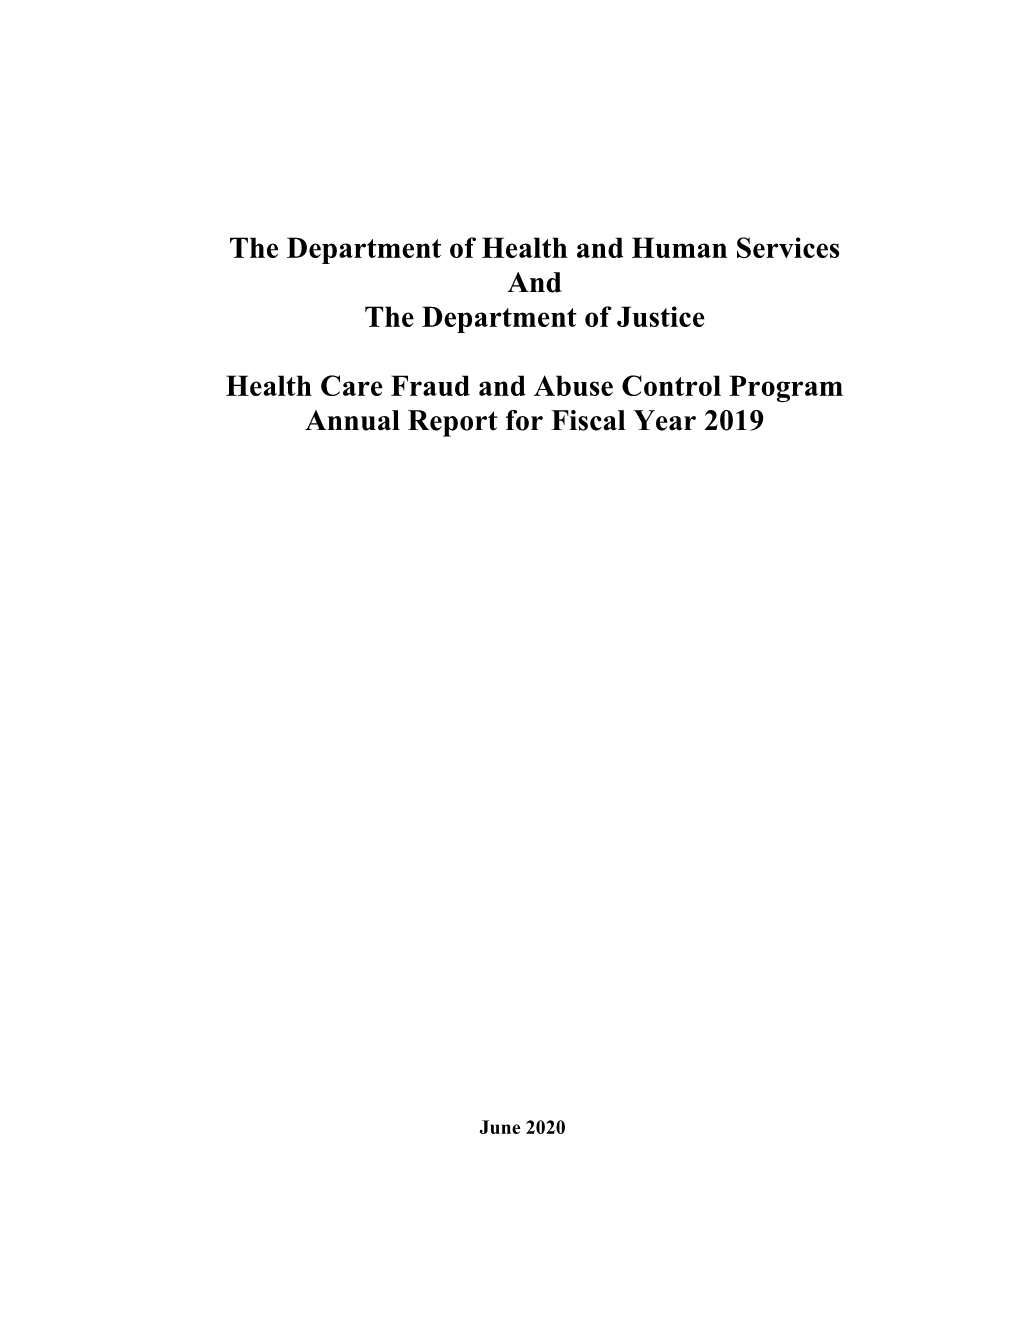 Health Care Fraud and Abuse Control Program Annual Report for Fiscal Year 2019